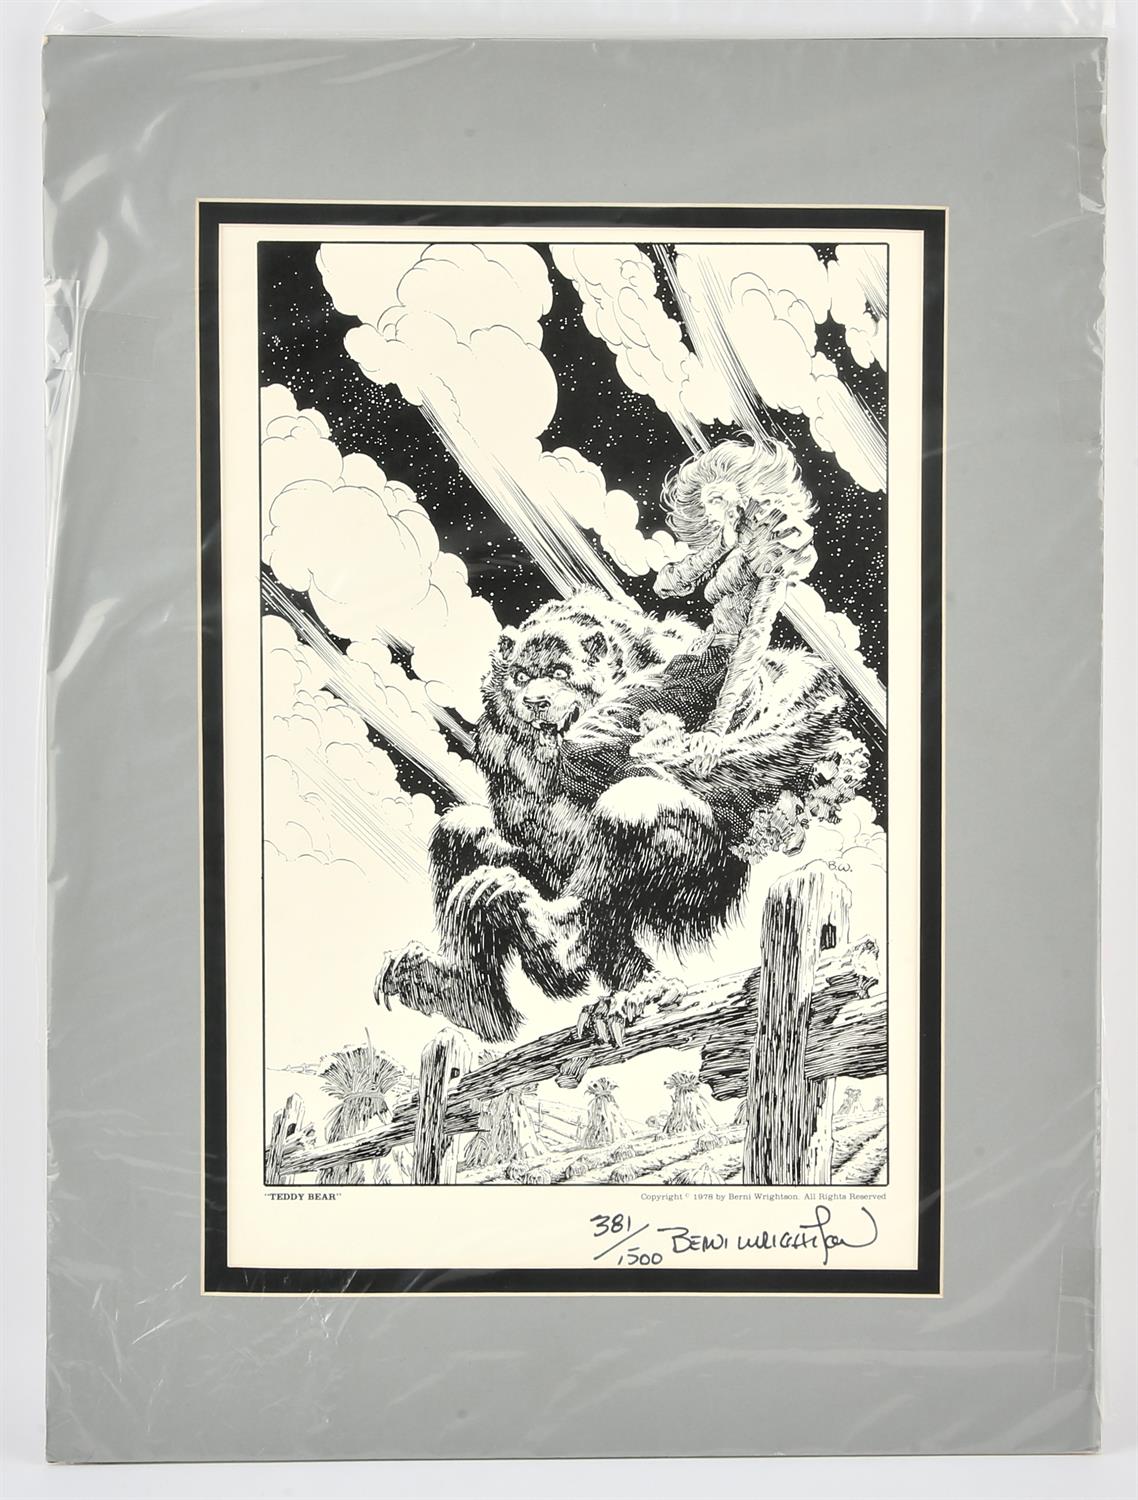 A collection of illustrated portfolios and art prints by Berni Wrightson. A collection of with - Image 6 of 6